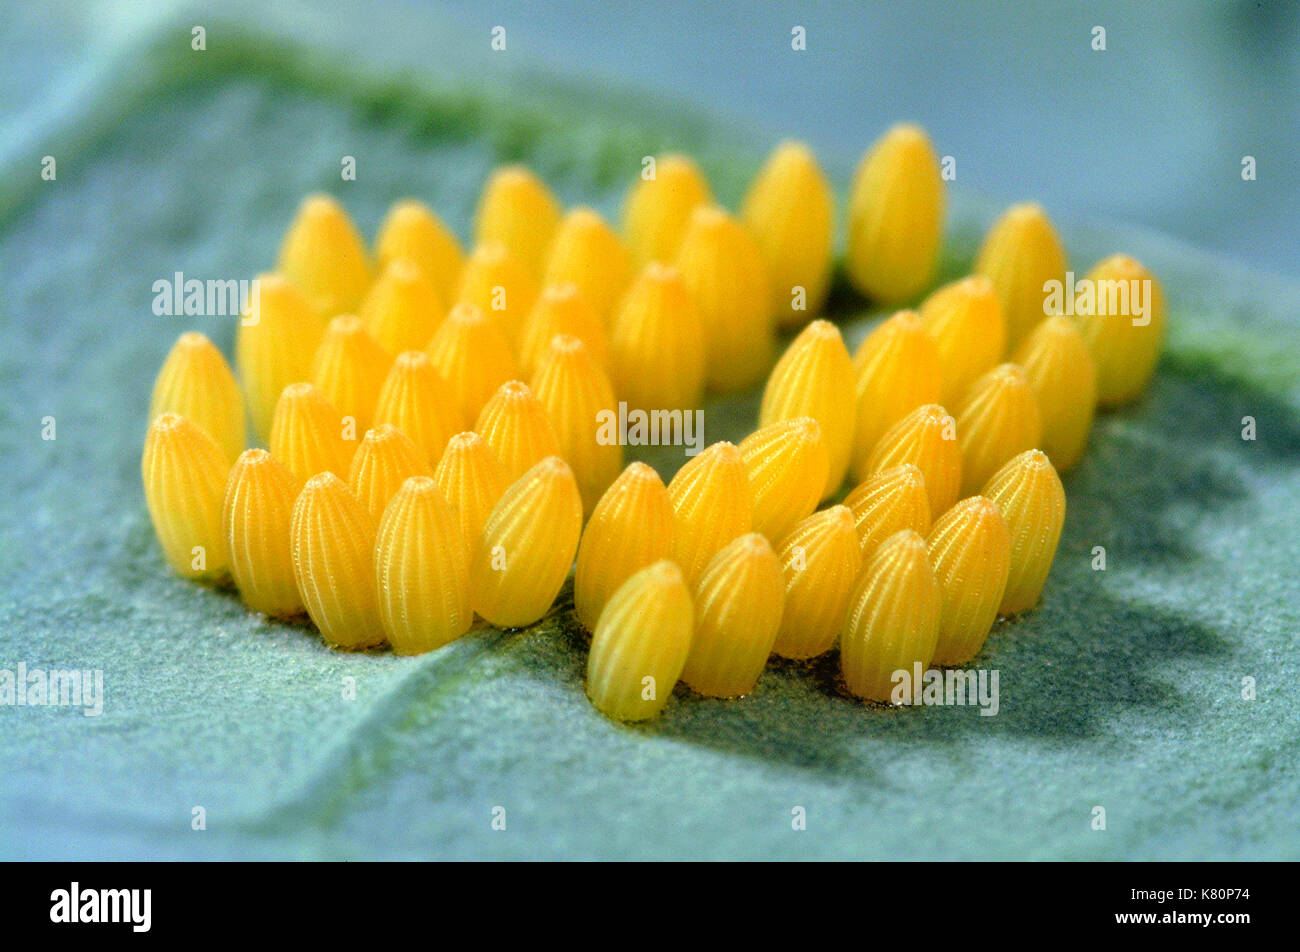 Cabbage White Butterfly (Pieris brassicae) eggs on a cabbage leaf Stock Photo